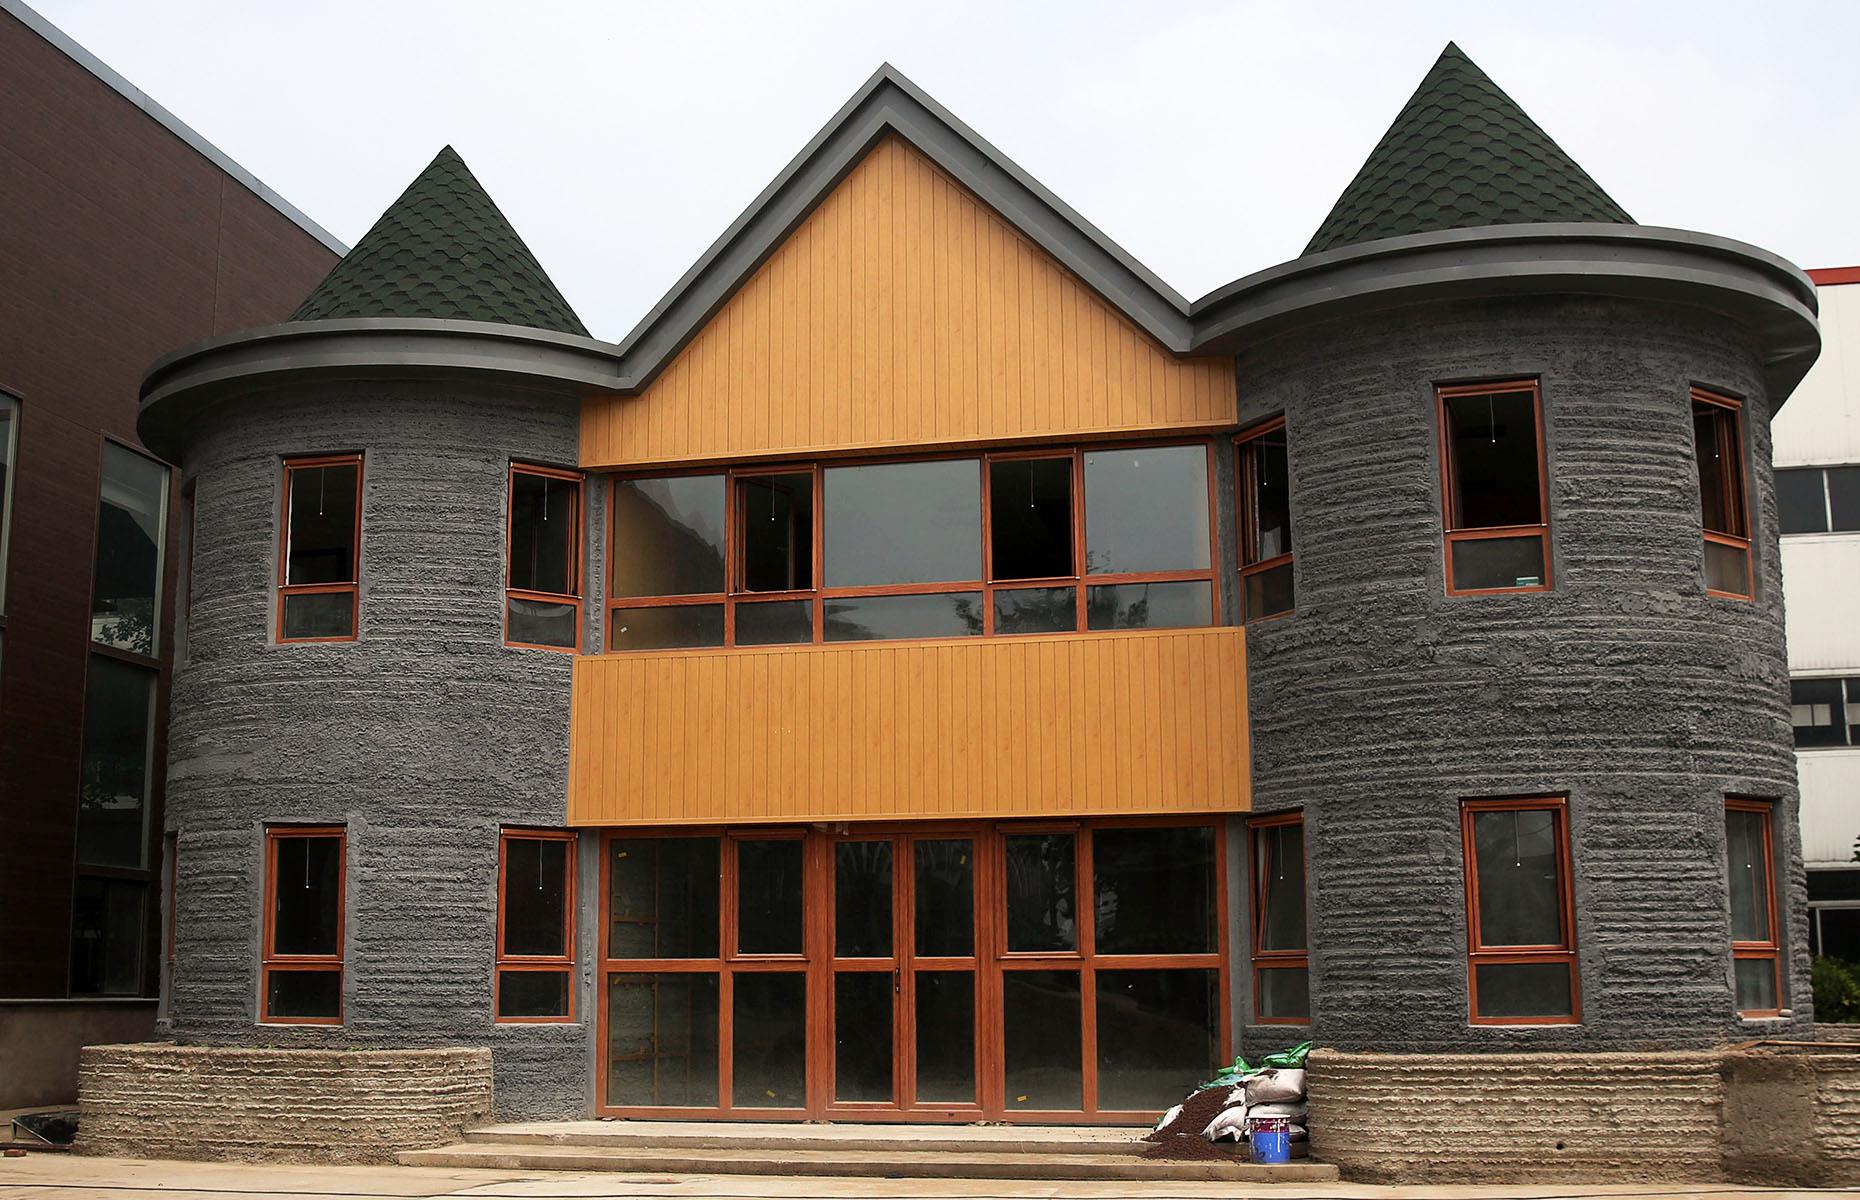 <p>The latest mega-sized 3D printers can construct whole buildings with minimal human labor, and several firms have already embraced the technology. In 2016, Chinese real estate company Huashang Tengda used a 3D printer to build a two-story house in just 45 days (pictured). Construction workers simply had to install the property's frame, wiring, and plumbing, and the printer took care of the rest.</p>  <p>Meanwhile, California-based company Azure Printed Homes plans to start 3D-printing houses using recycled materials and technology that could enable them to build a home in just 12 hours. </p>